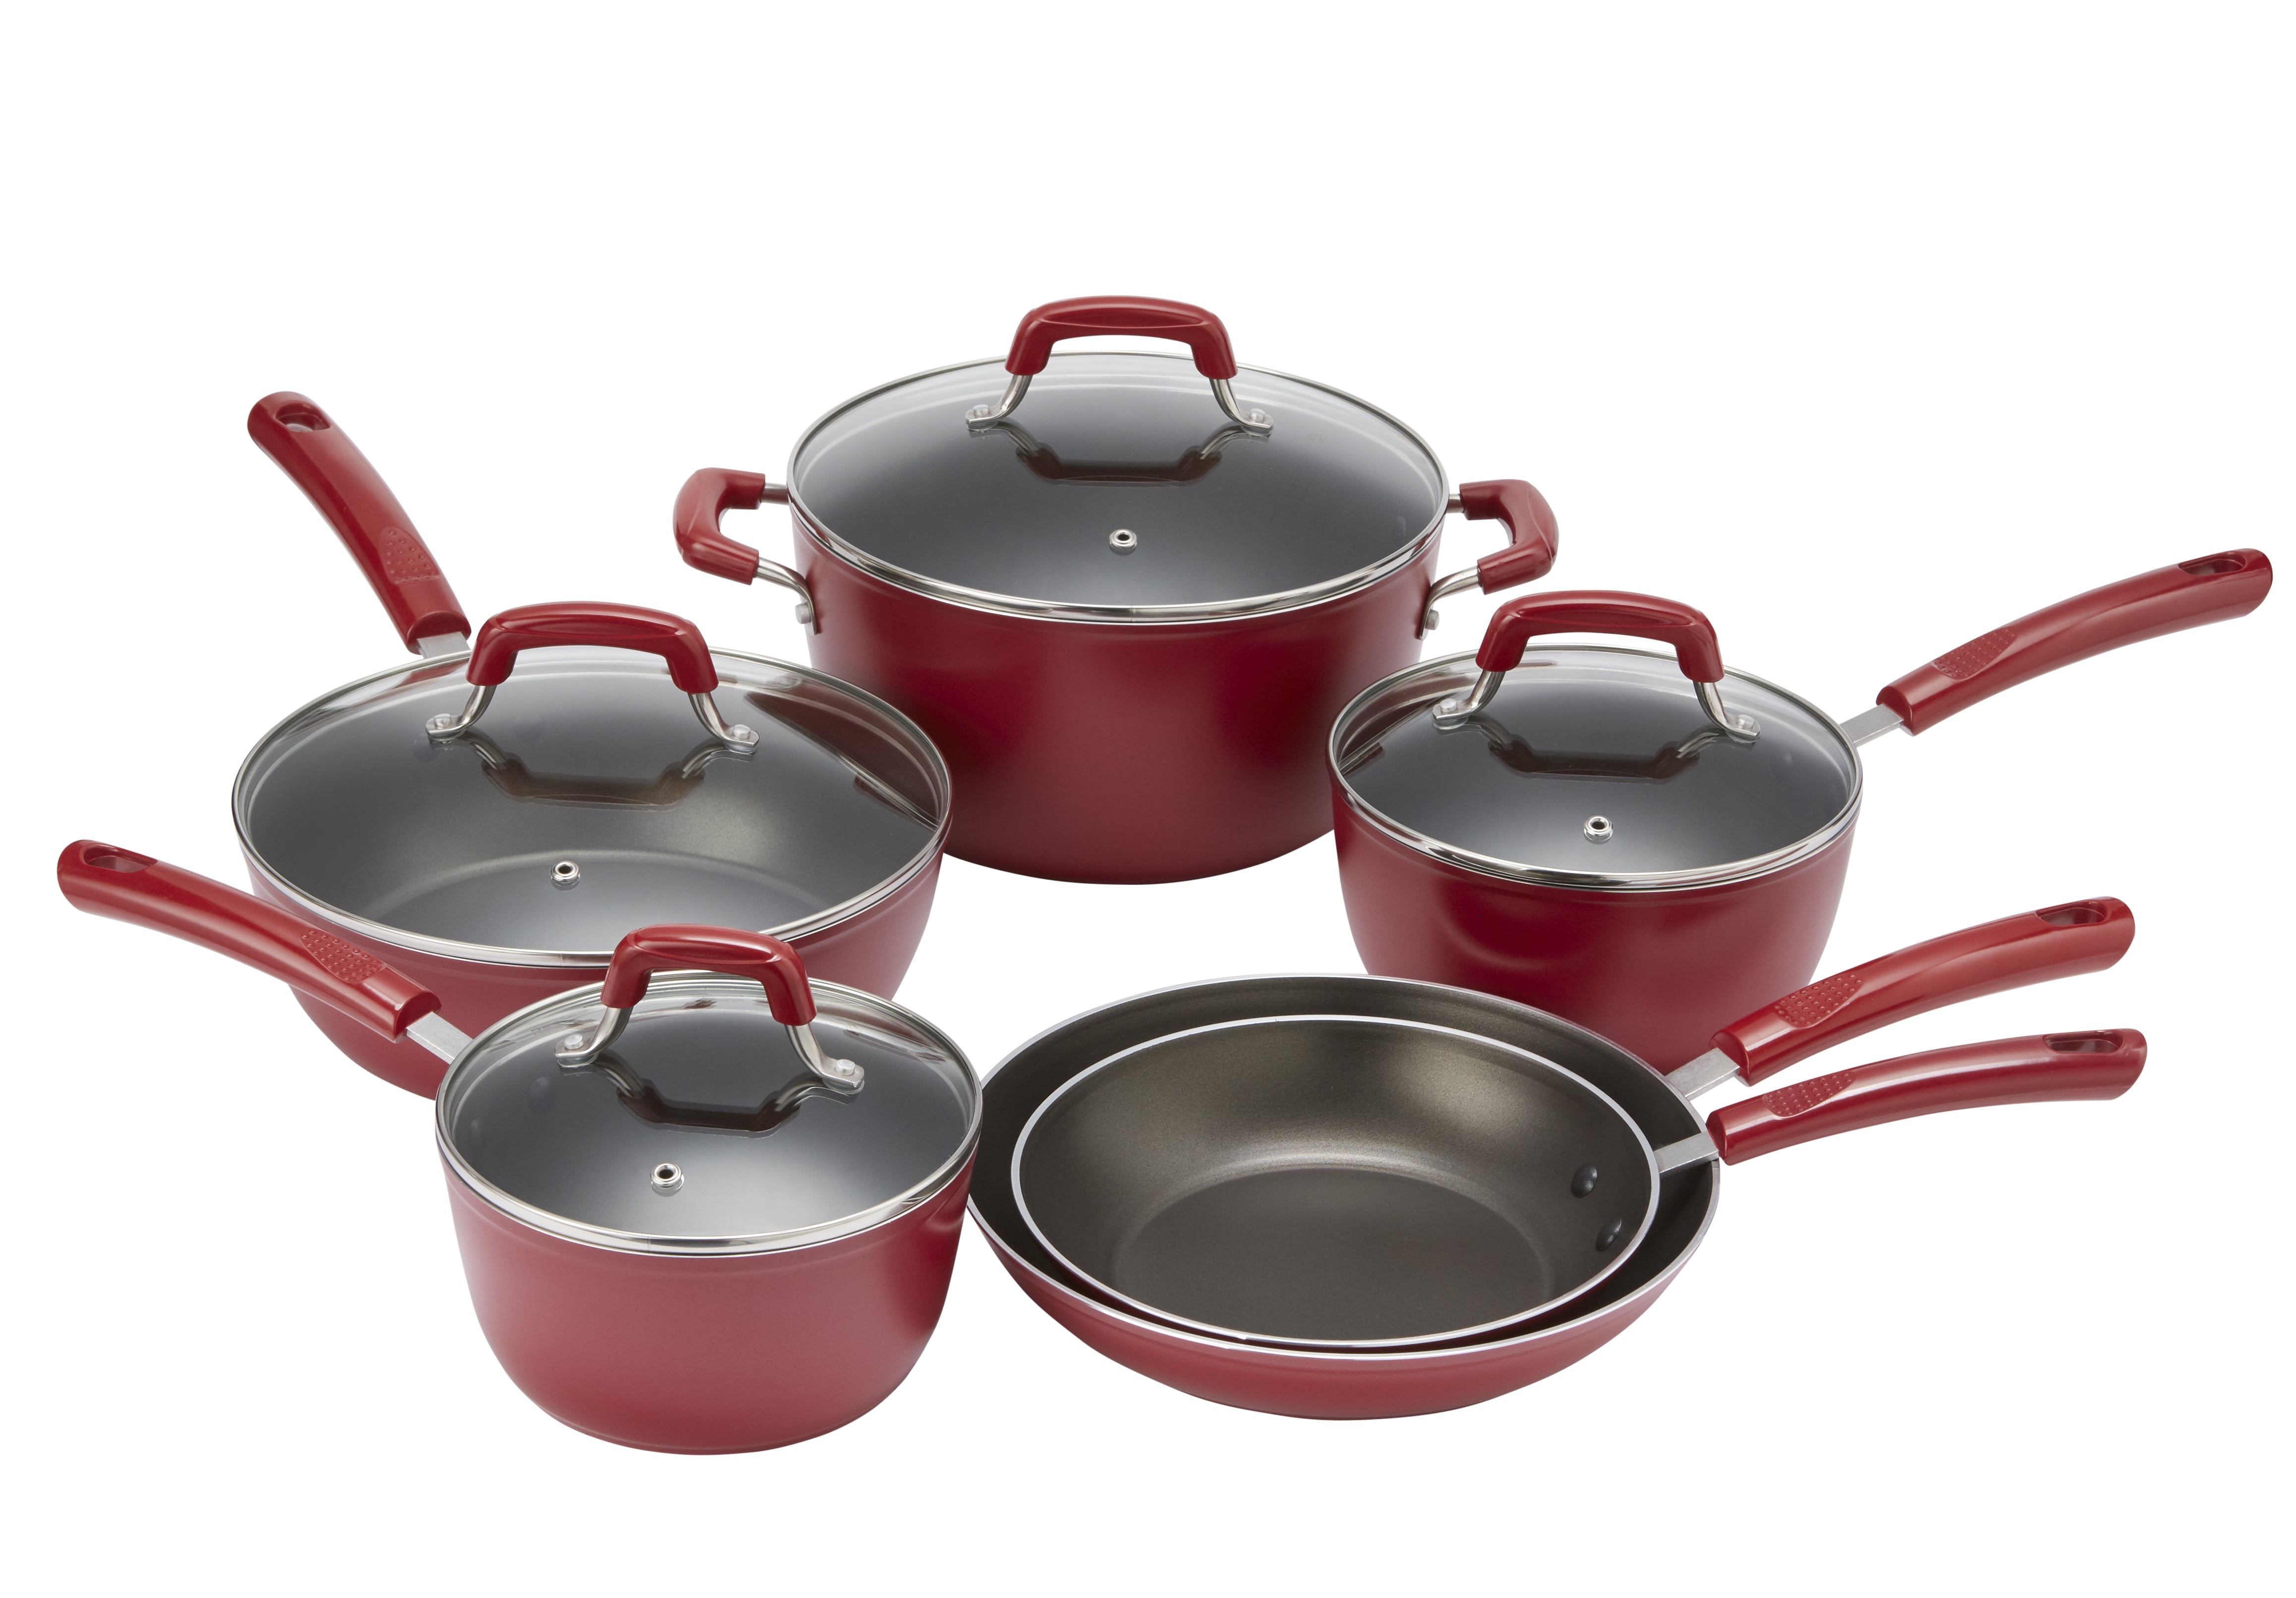 Kitchen & Table by H-E-B Nonstick Cookware Set - Bordeaux Red